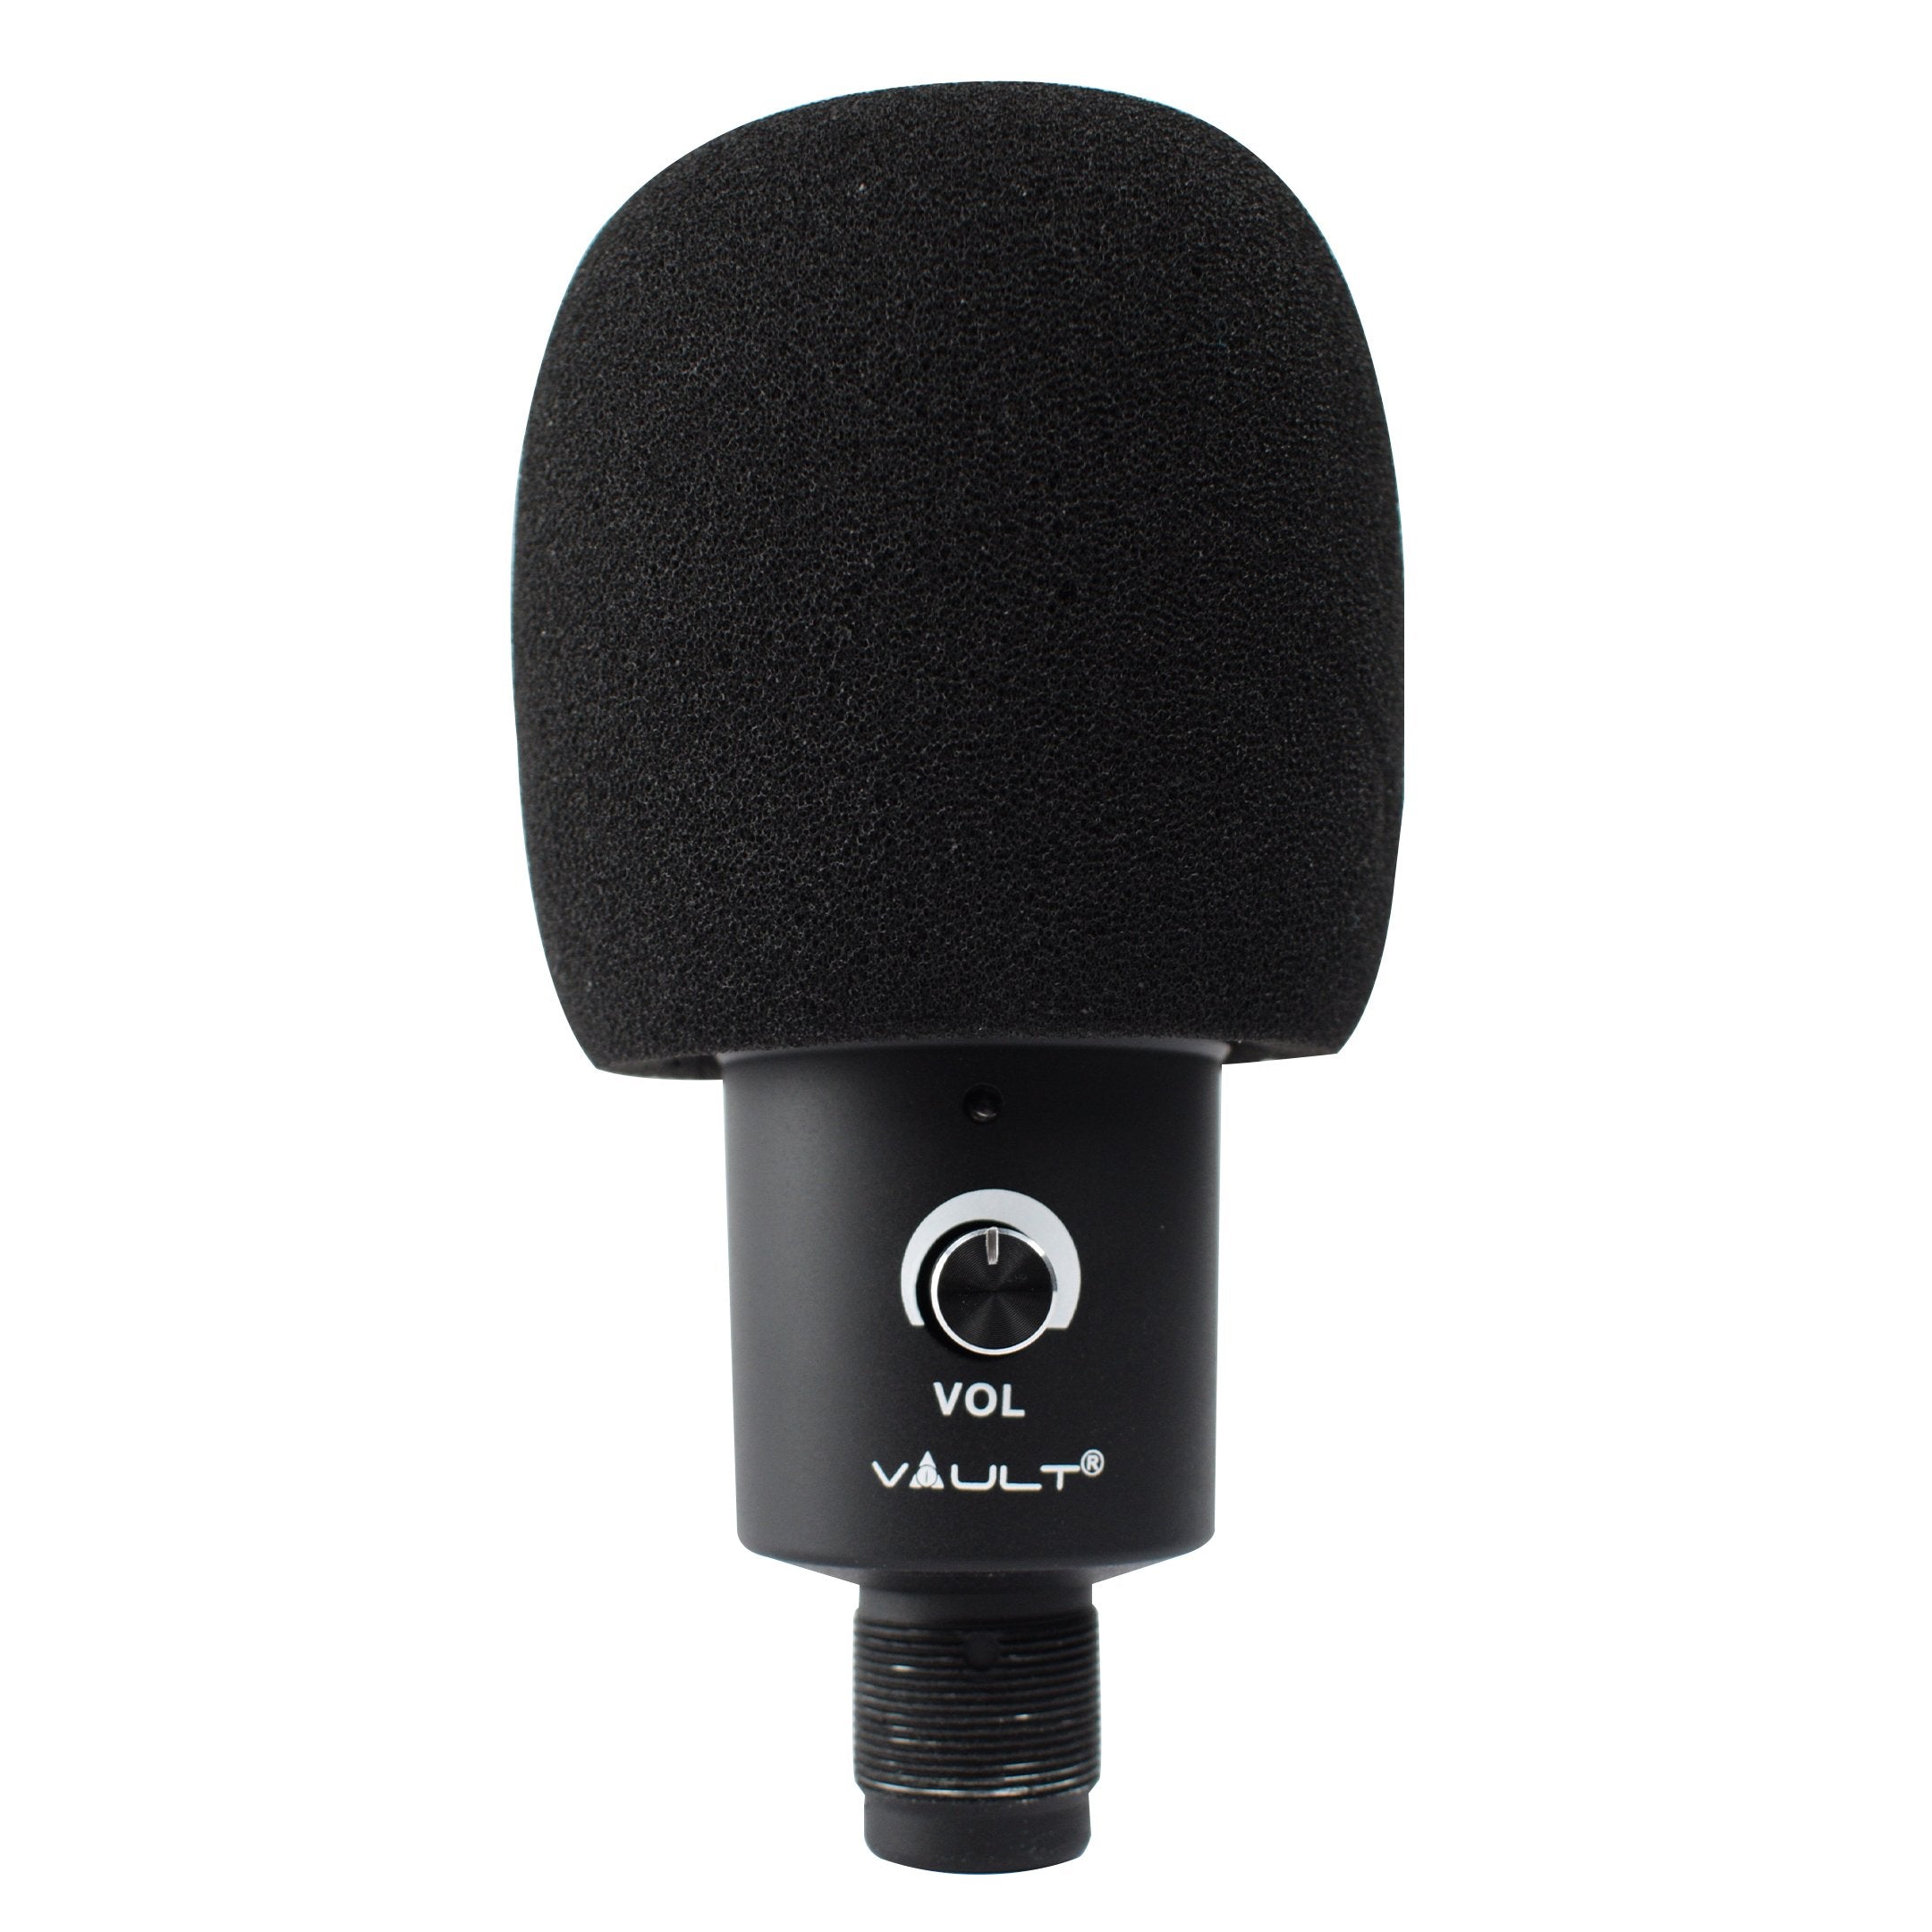 Buy Shure SM7B Cardioid Dynamic Mic MIC HIQH Quality Vocal at Connection  Public Sector Solutions